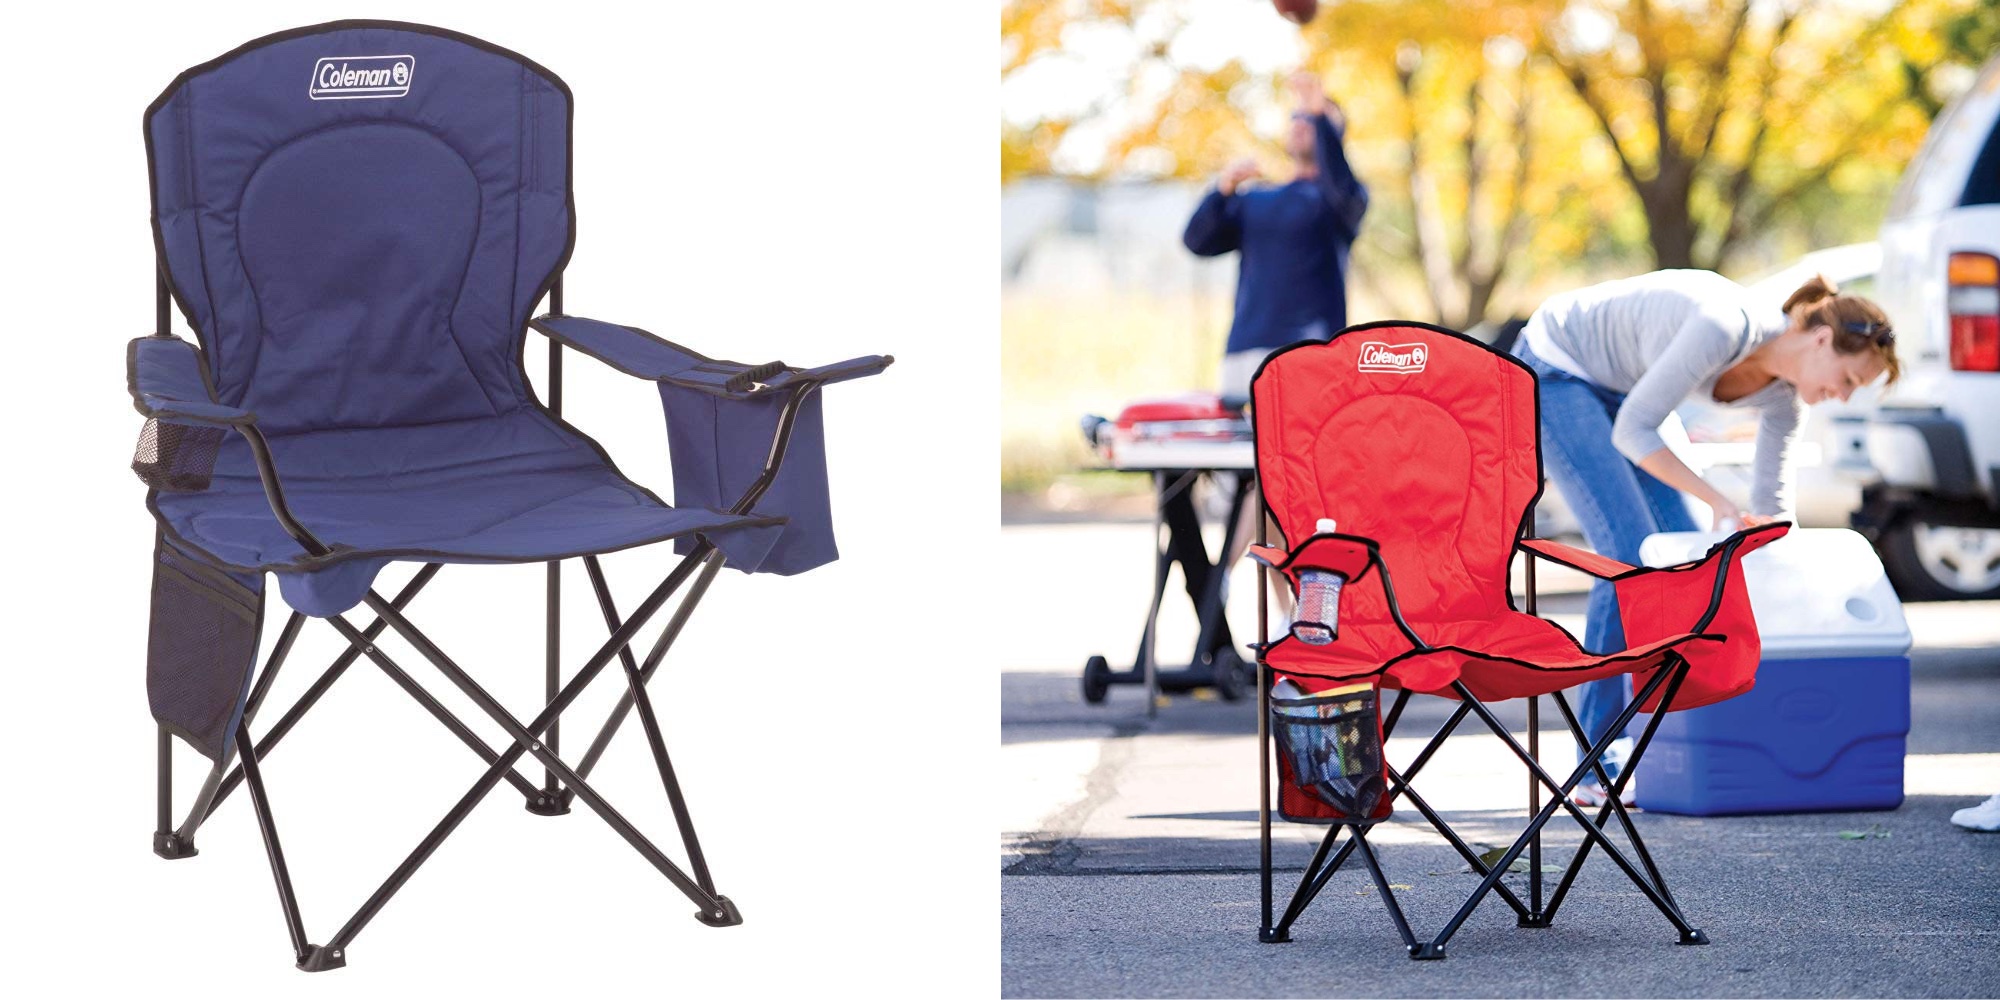 coleman portable camping quad chair